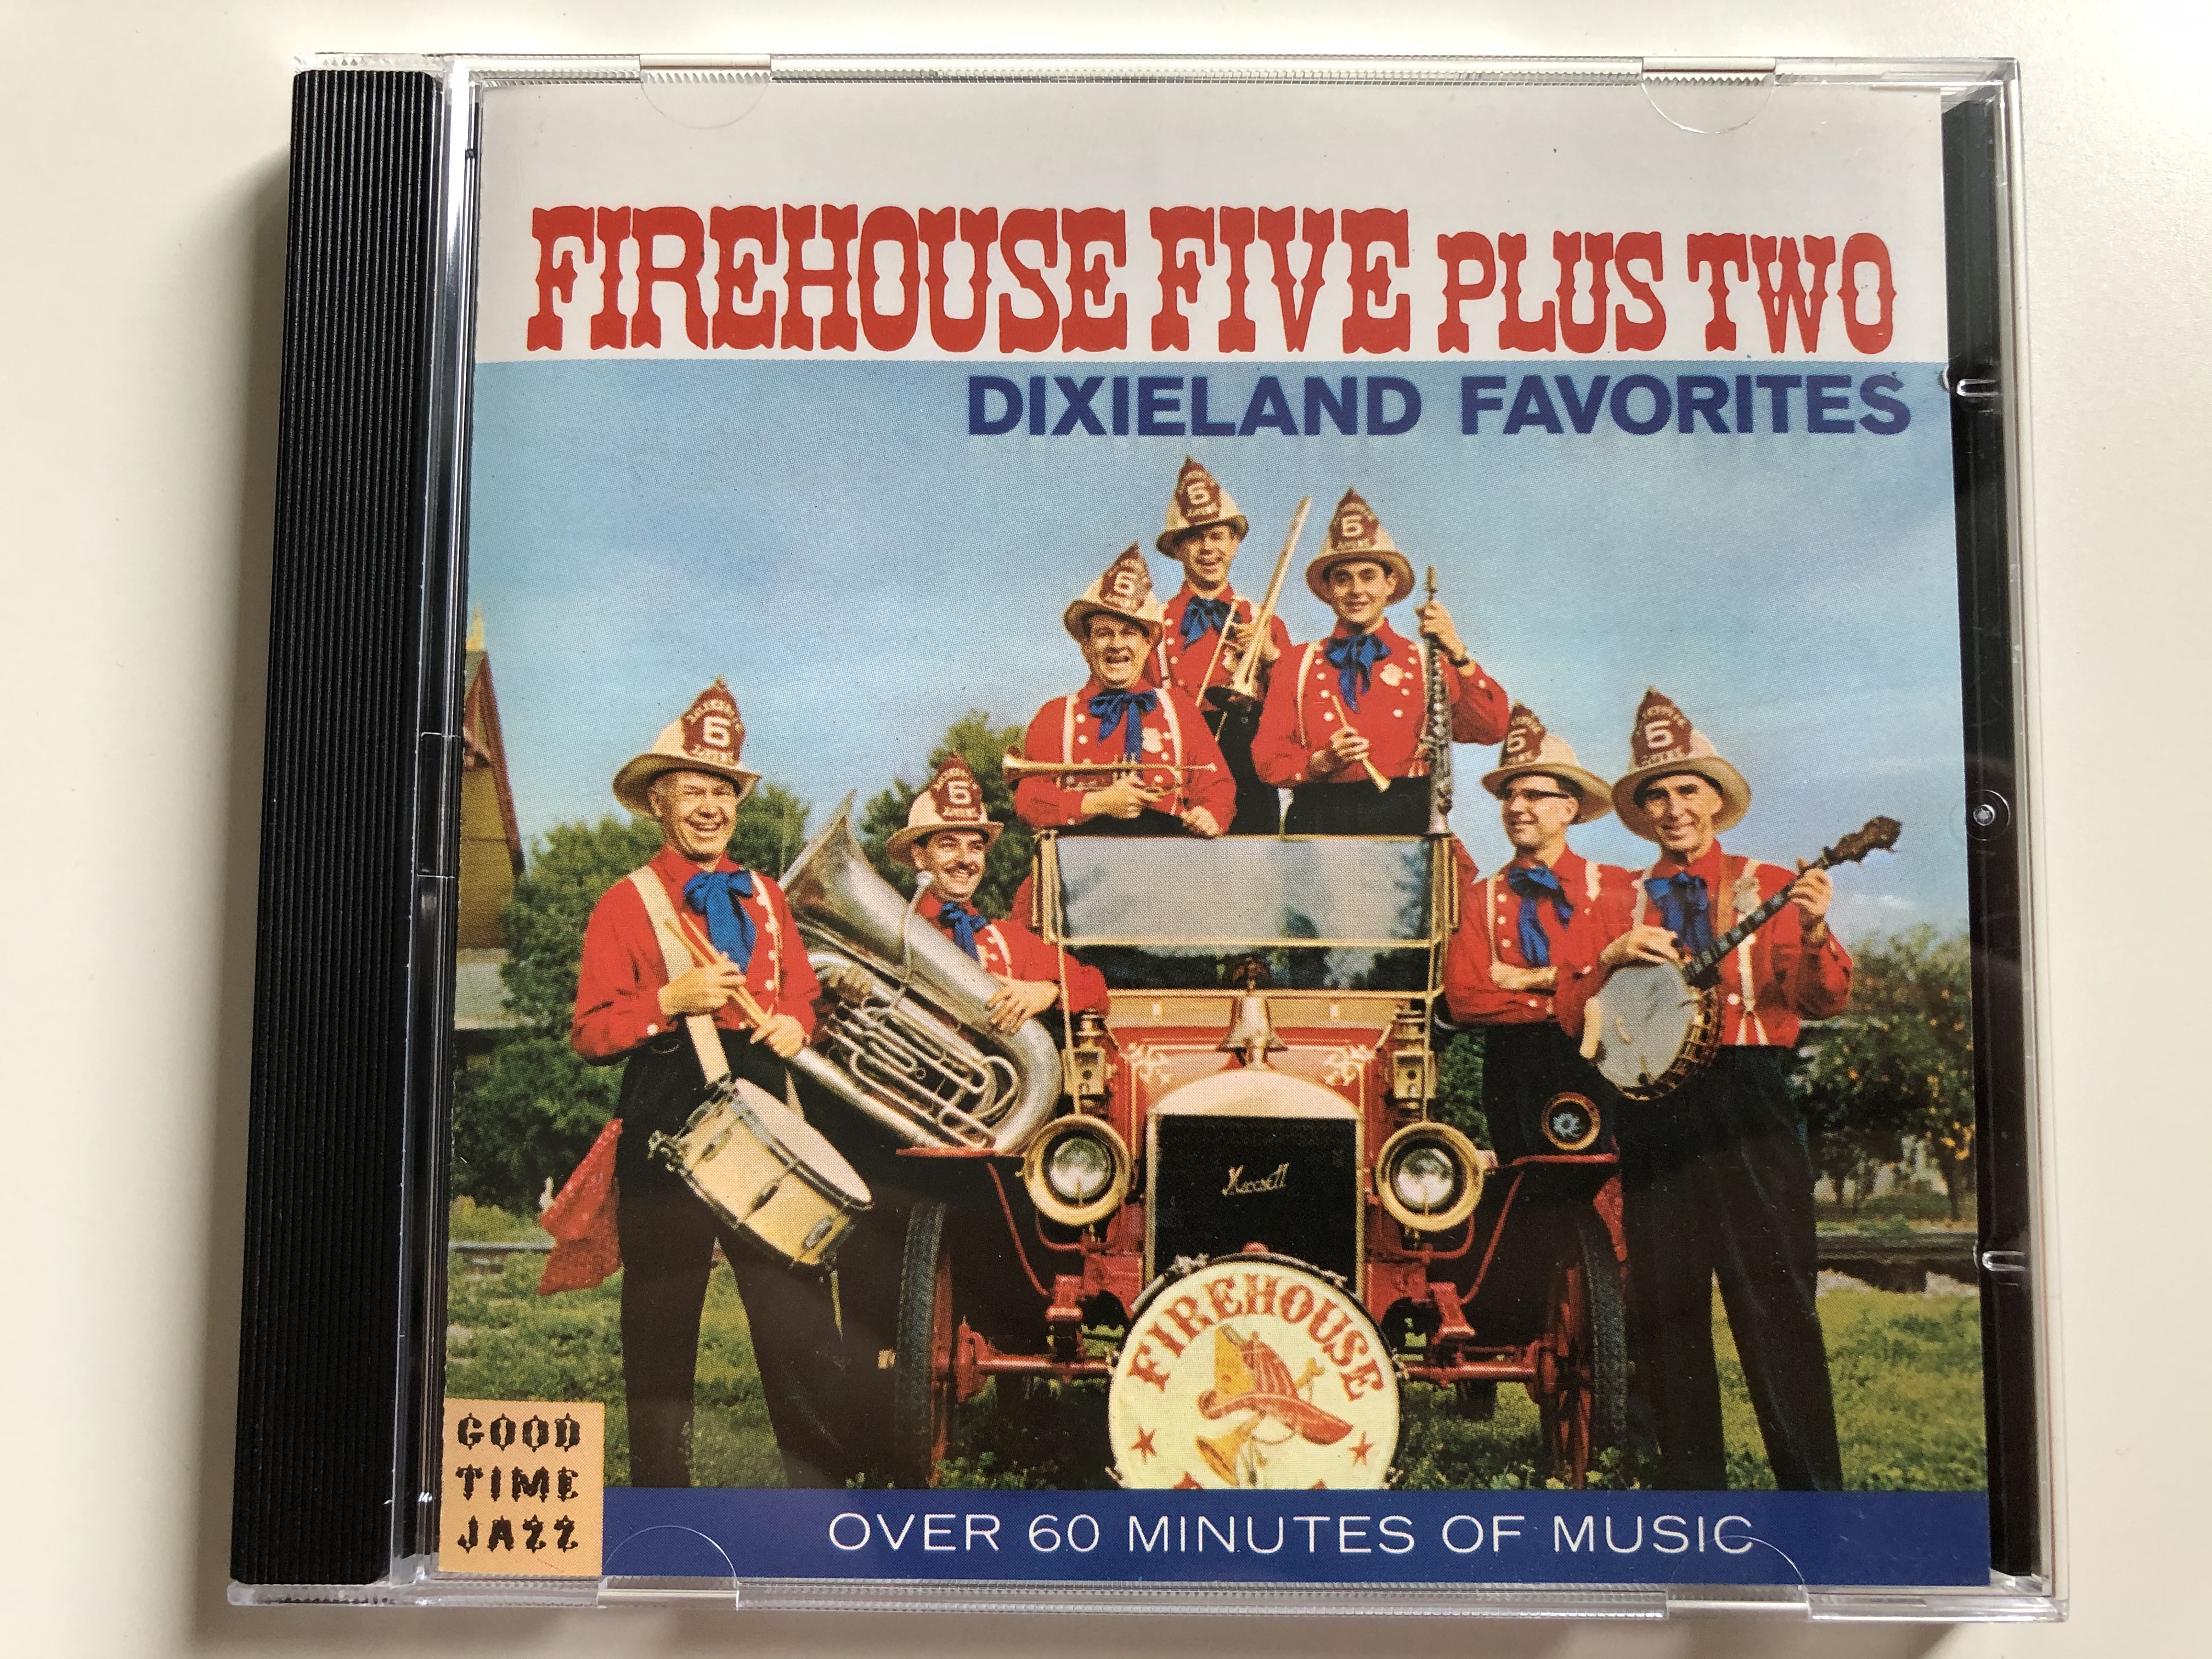 firehouse-five-plus-two-dixieland-favorites-over-60-minutes-of-music-good-time-jazz-audio-cd-1986-stereo-fcd-60-008-1-.jpg